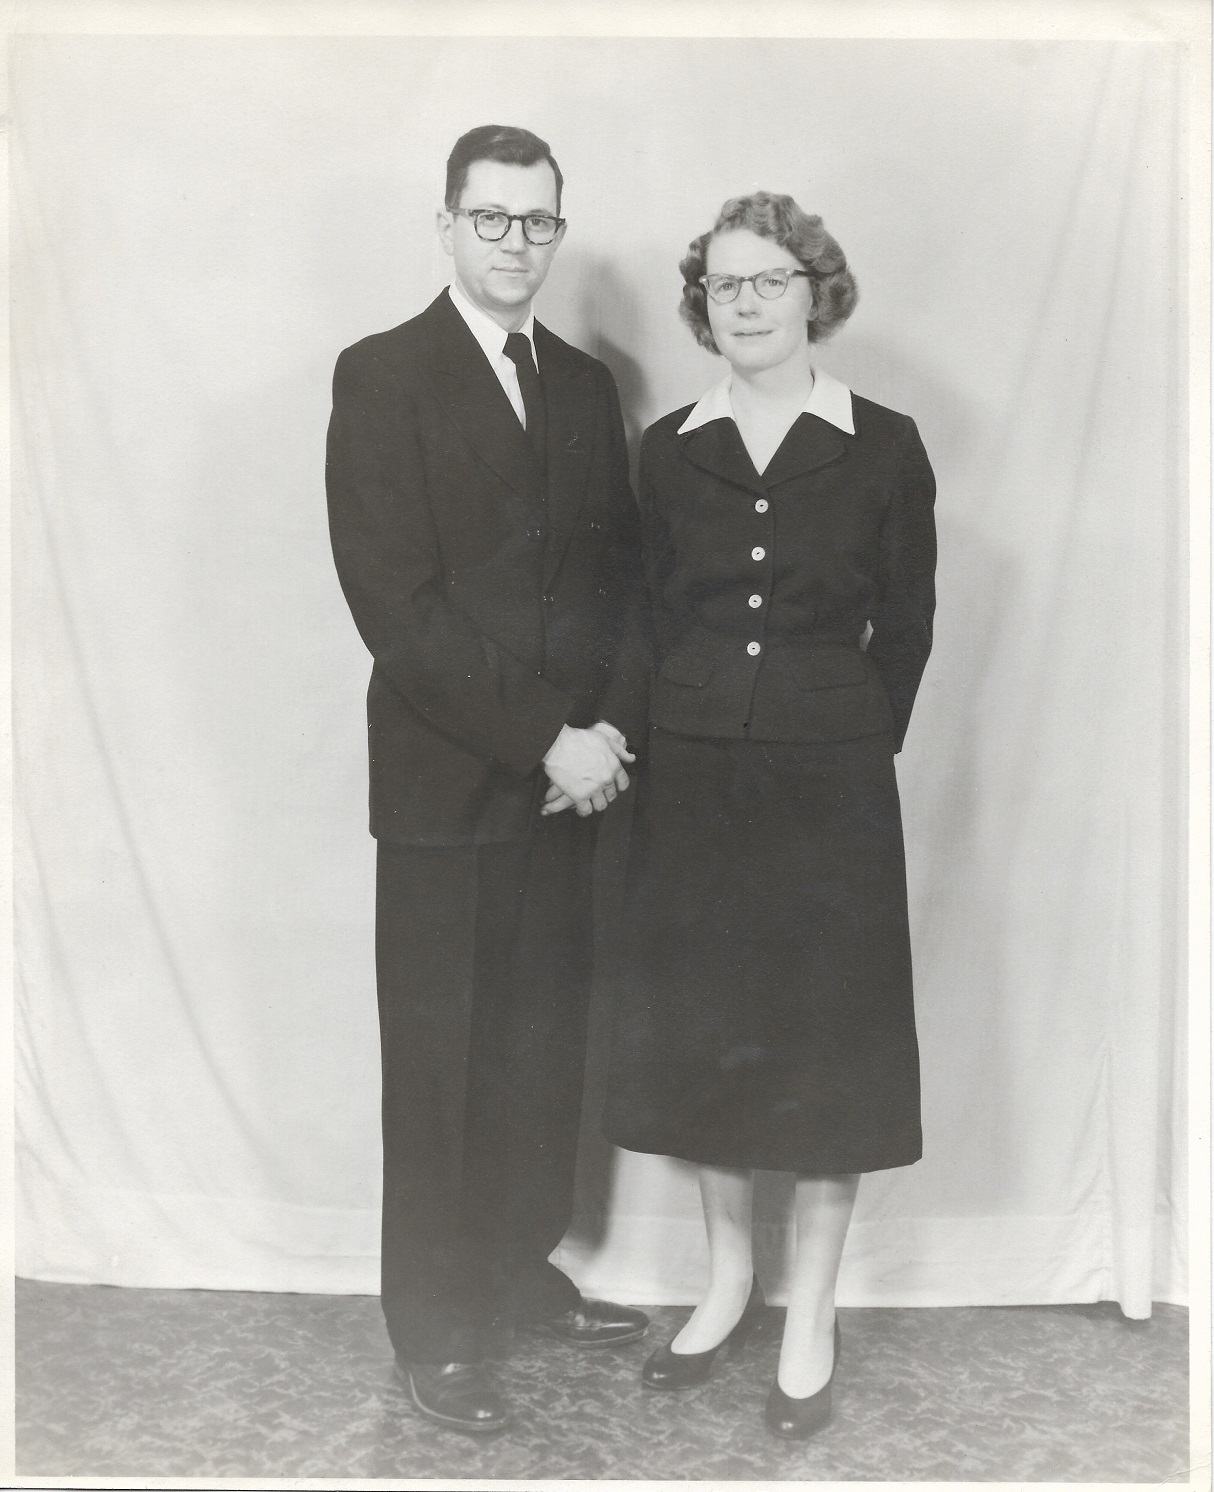 This photo depicts my paternal grandparents at their wedding reception in 1958.